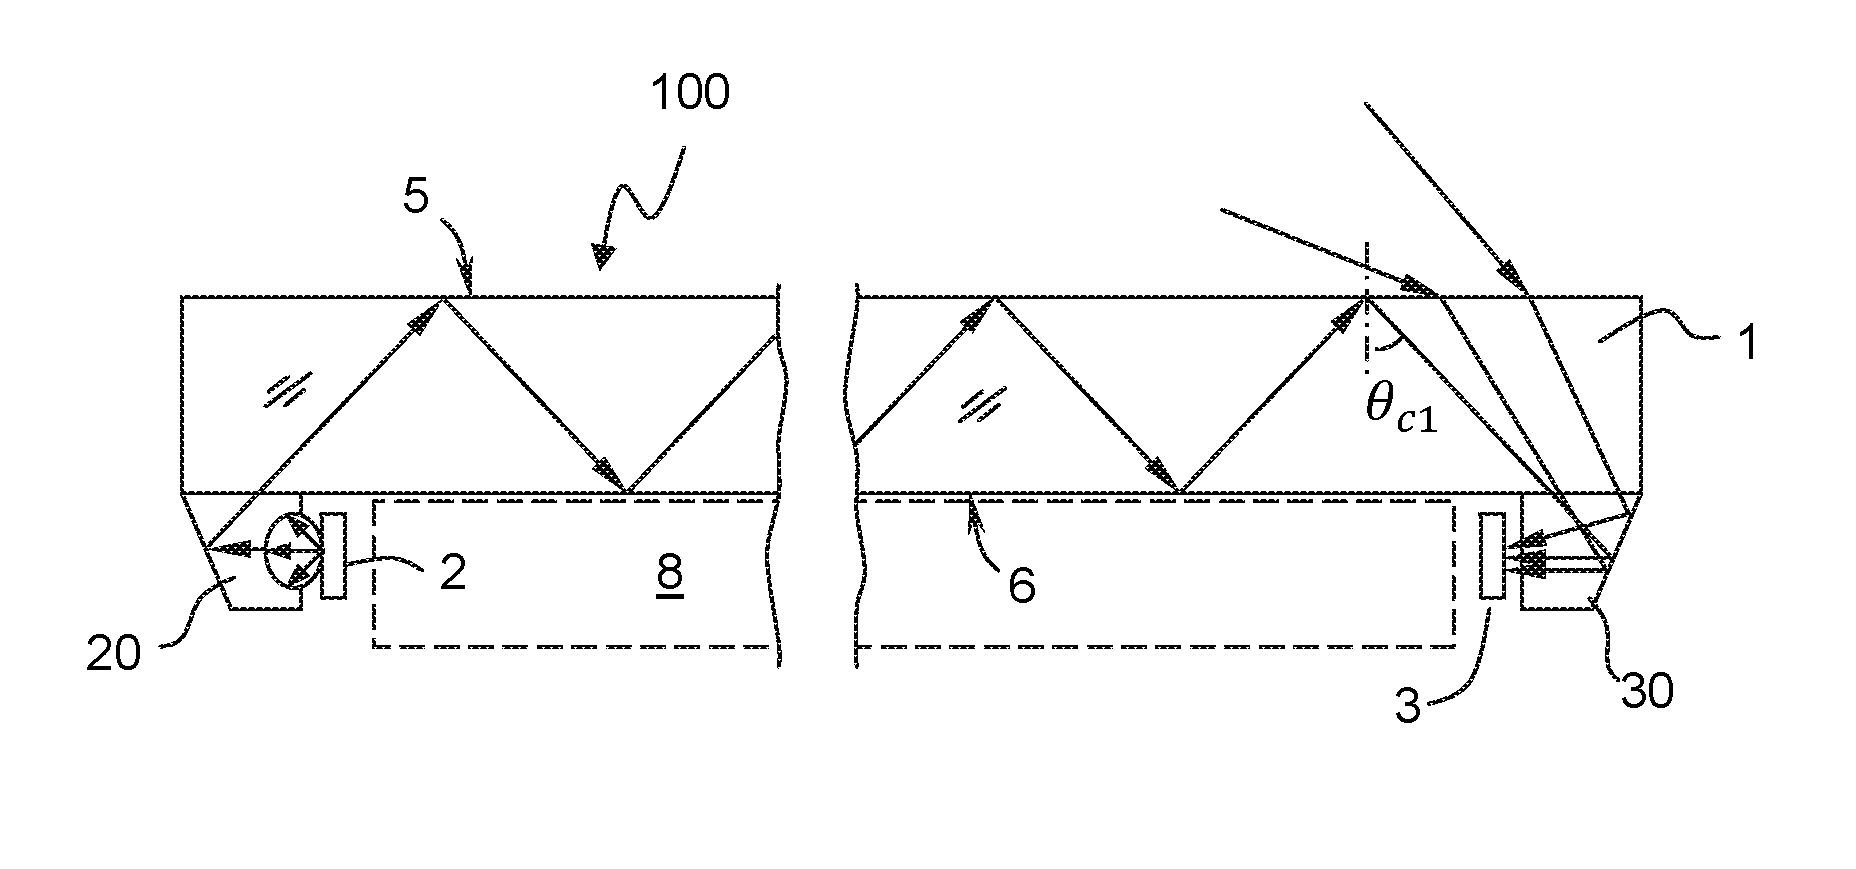 Laminated optical element for touch-sensing systems